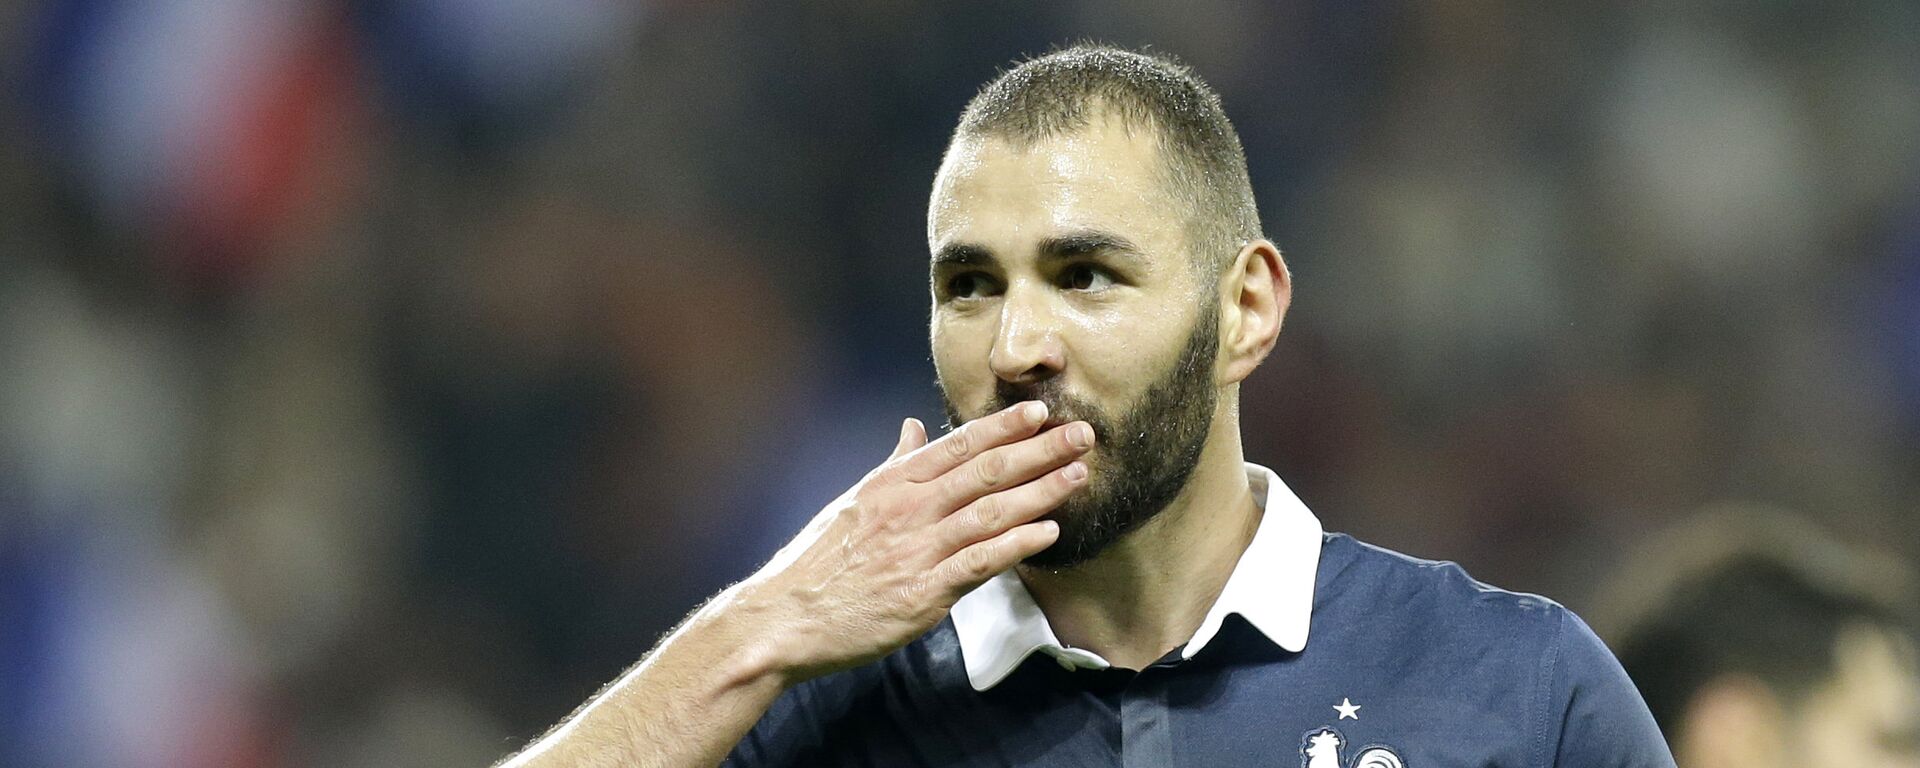 France's Karim Benzema reacts after scoring the fourth goal against Armenia during their friendly soccer match in the stadium of Nice, southeastern France, Thursday, Oct 8, 2015.  - Sputnik Mundo, 1920, 24.11.2021